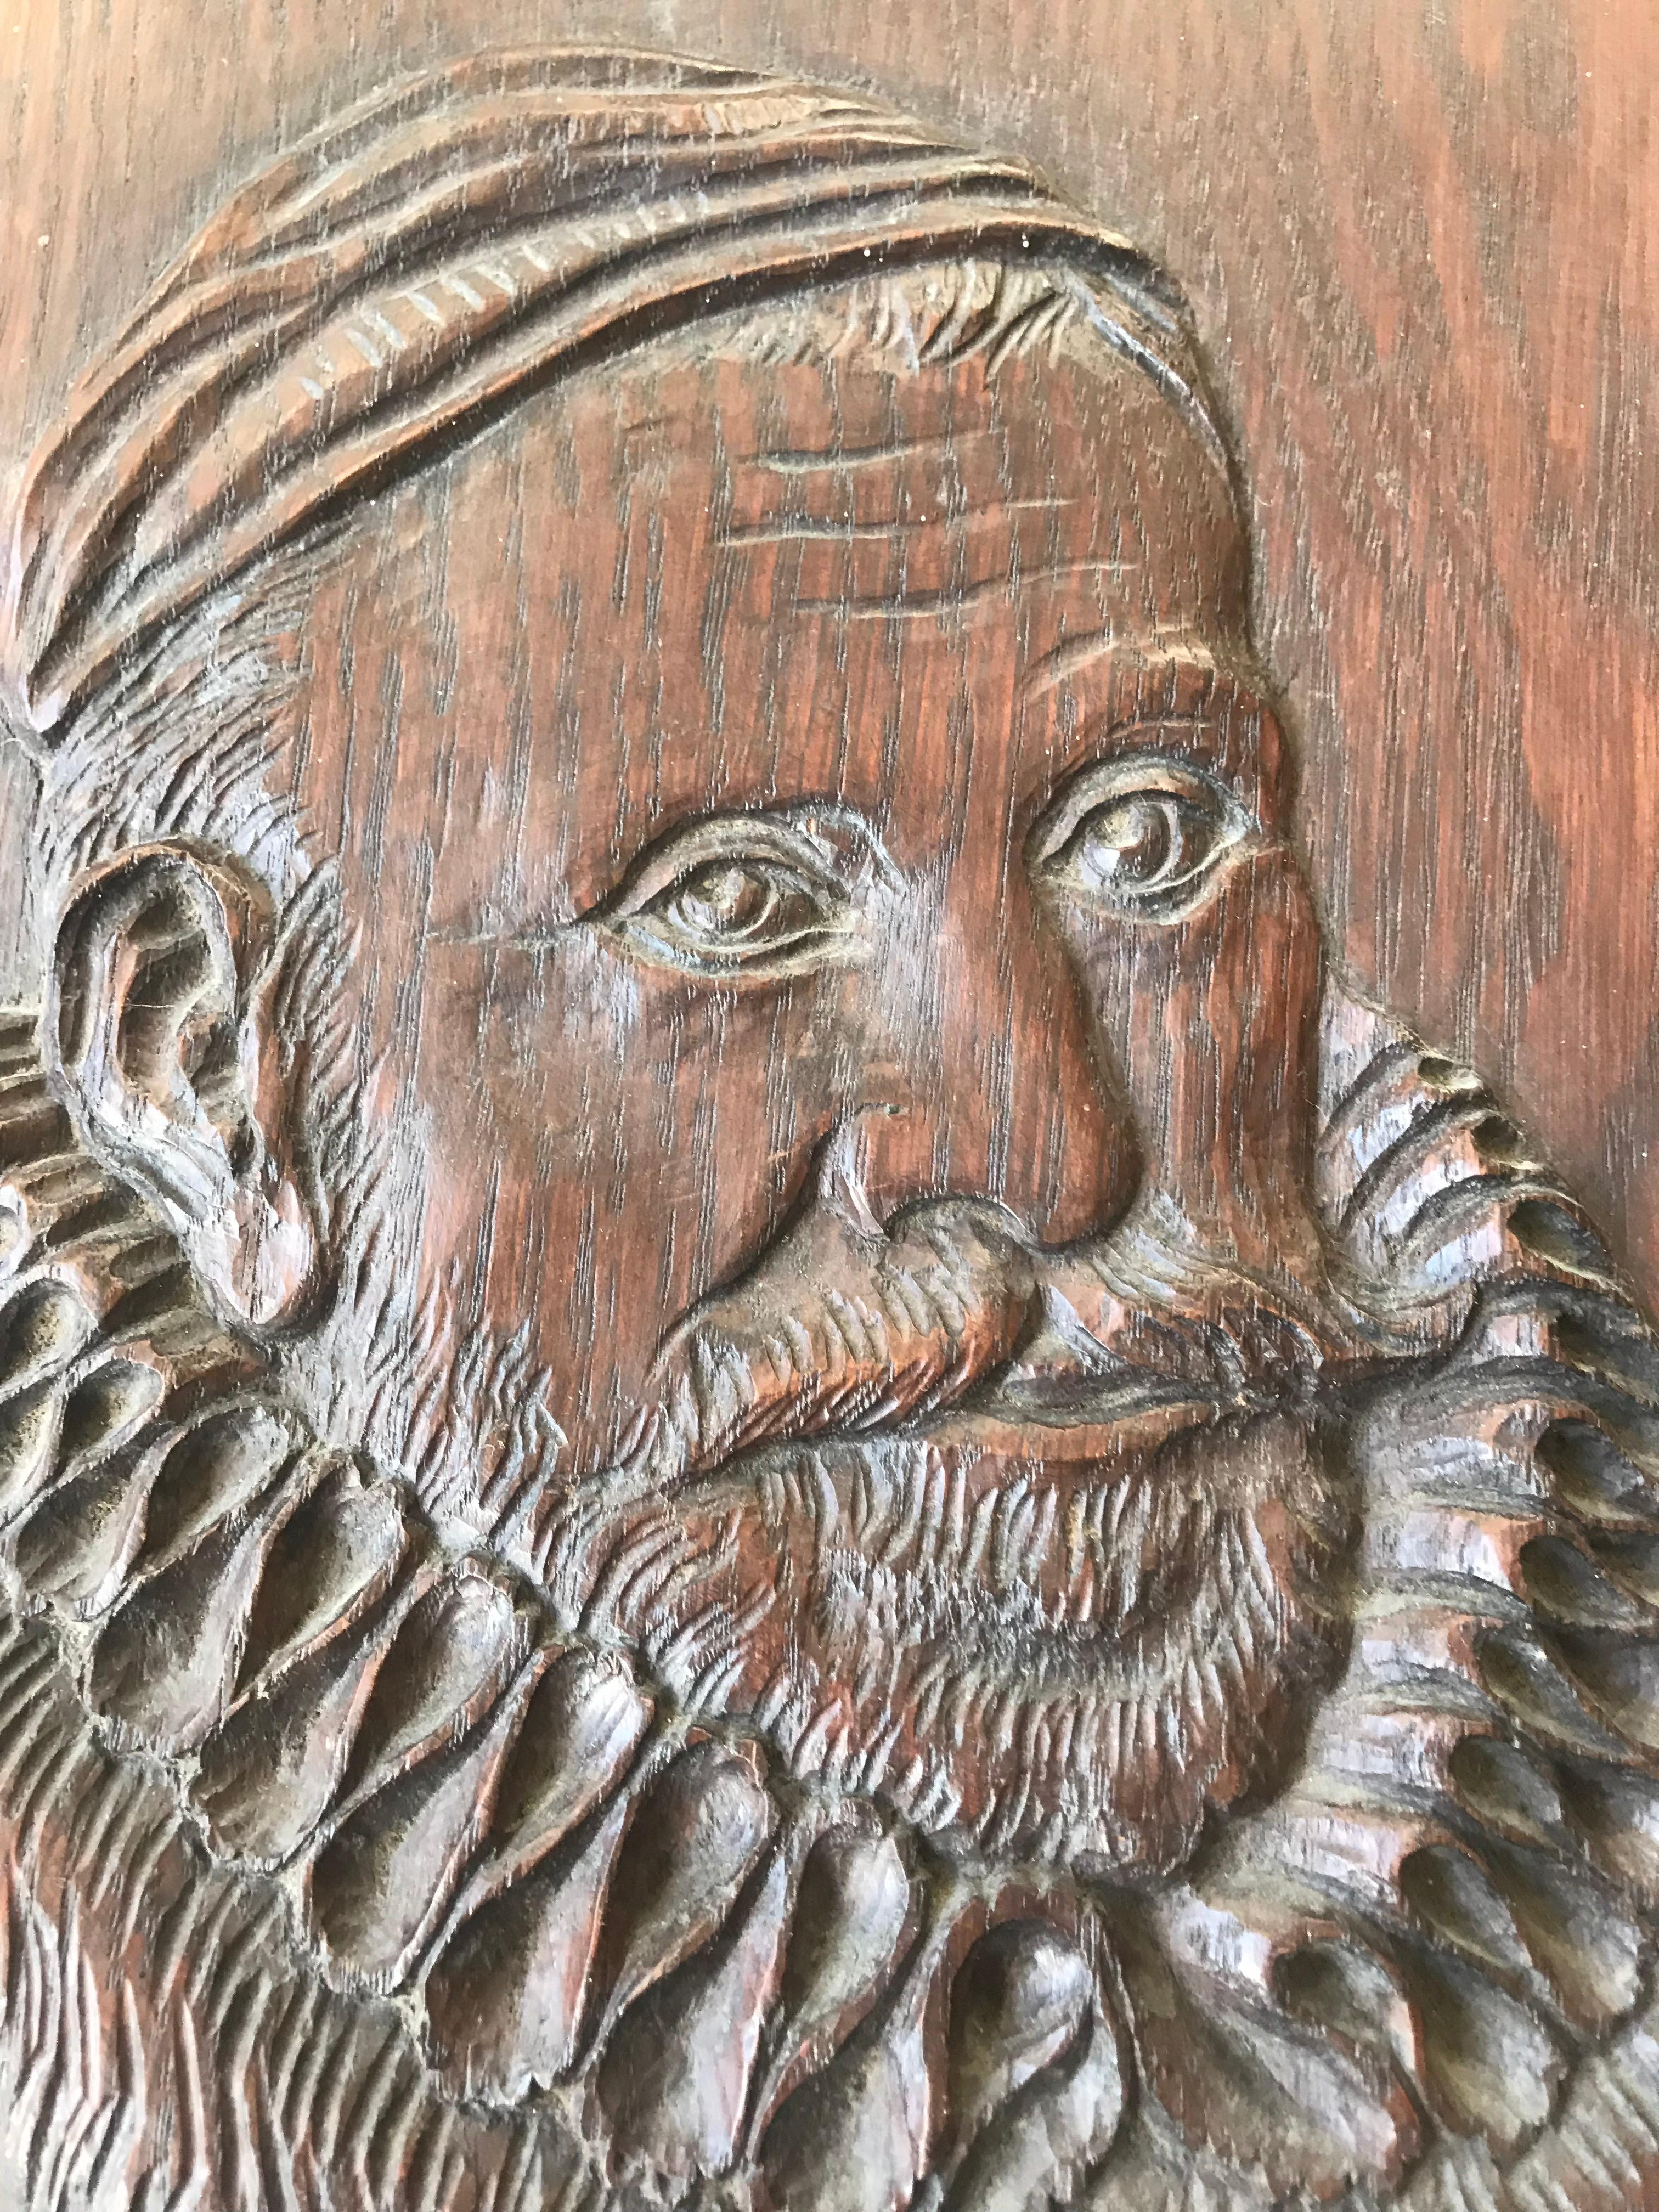 Rare and remarkable sculpture of a famous Dutch figure of the House of Orange-Nassau.

For the collectors of famous, Dutch historical figures, we are offering this extremely rare and highly decorative wall plaque depicting William I. or Prince of